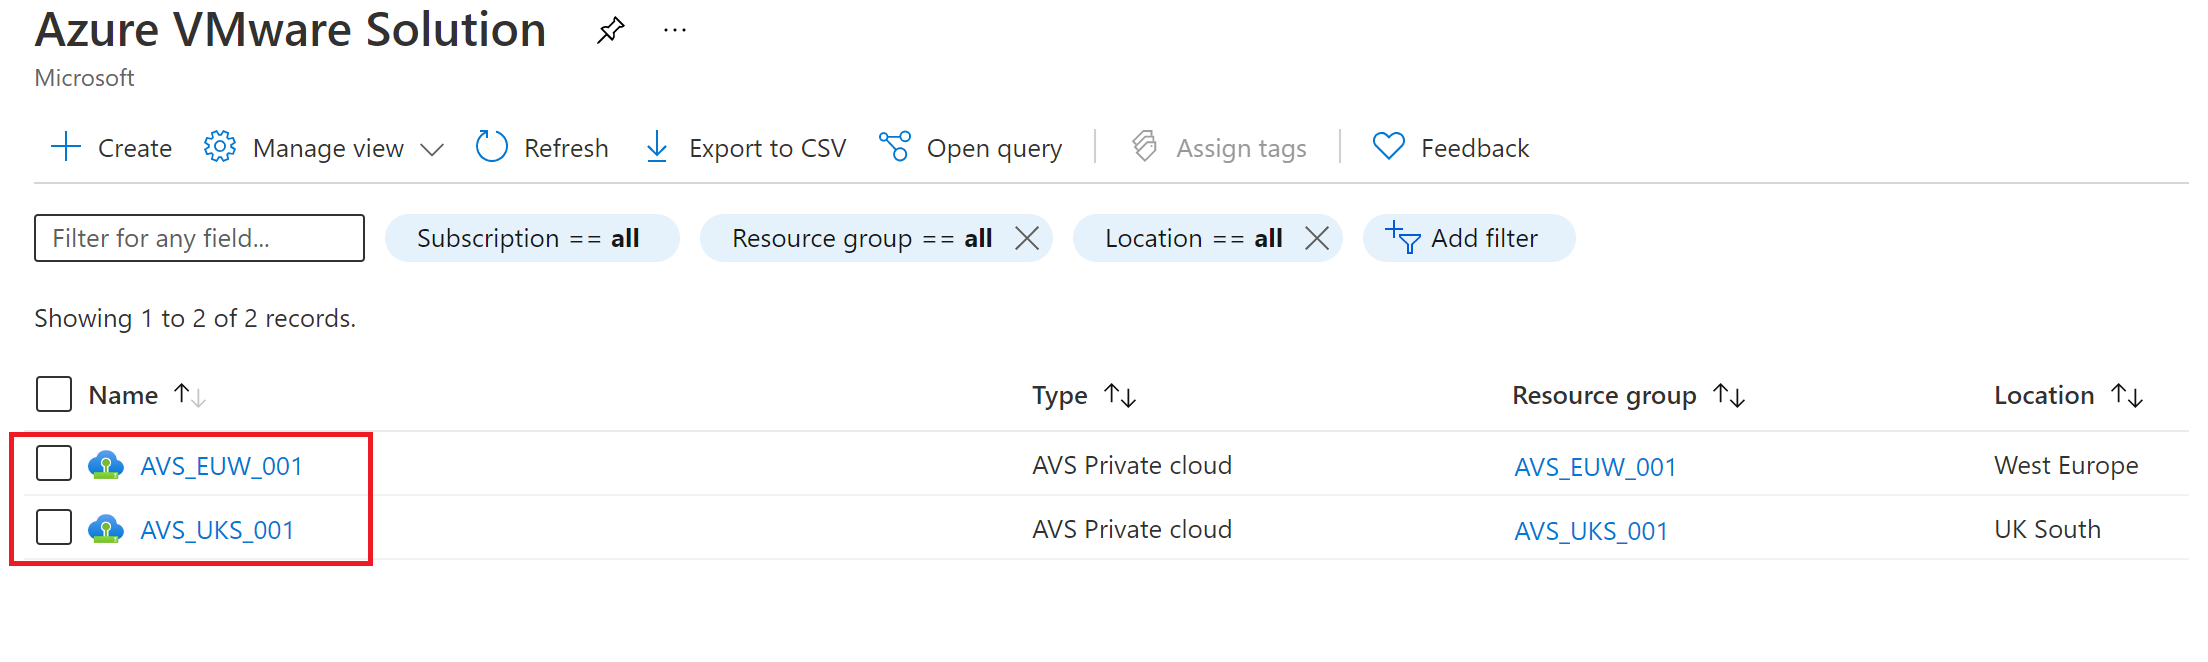 Screenshot showing two Azure VMware Solution private clouds in separate regions.